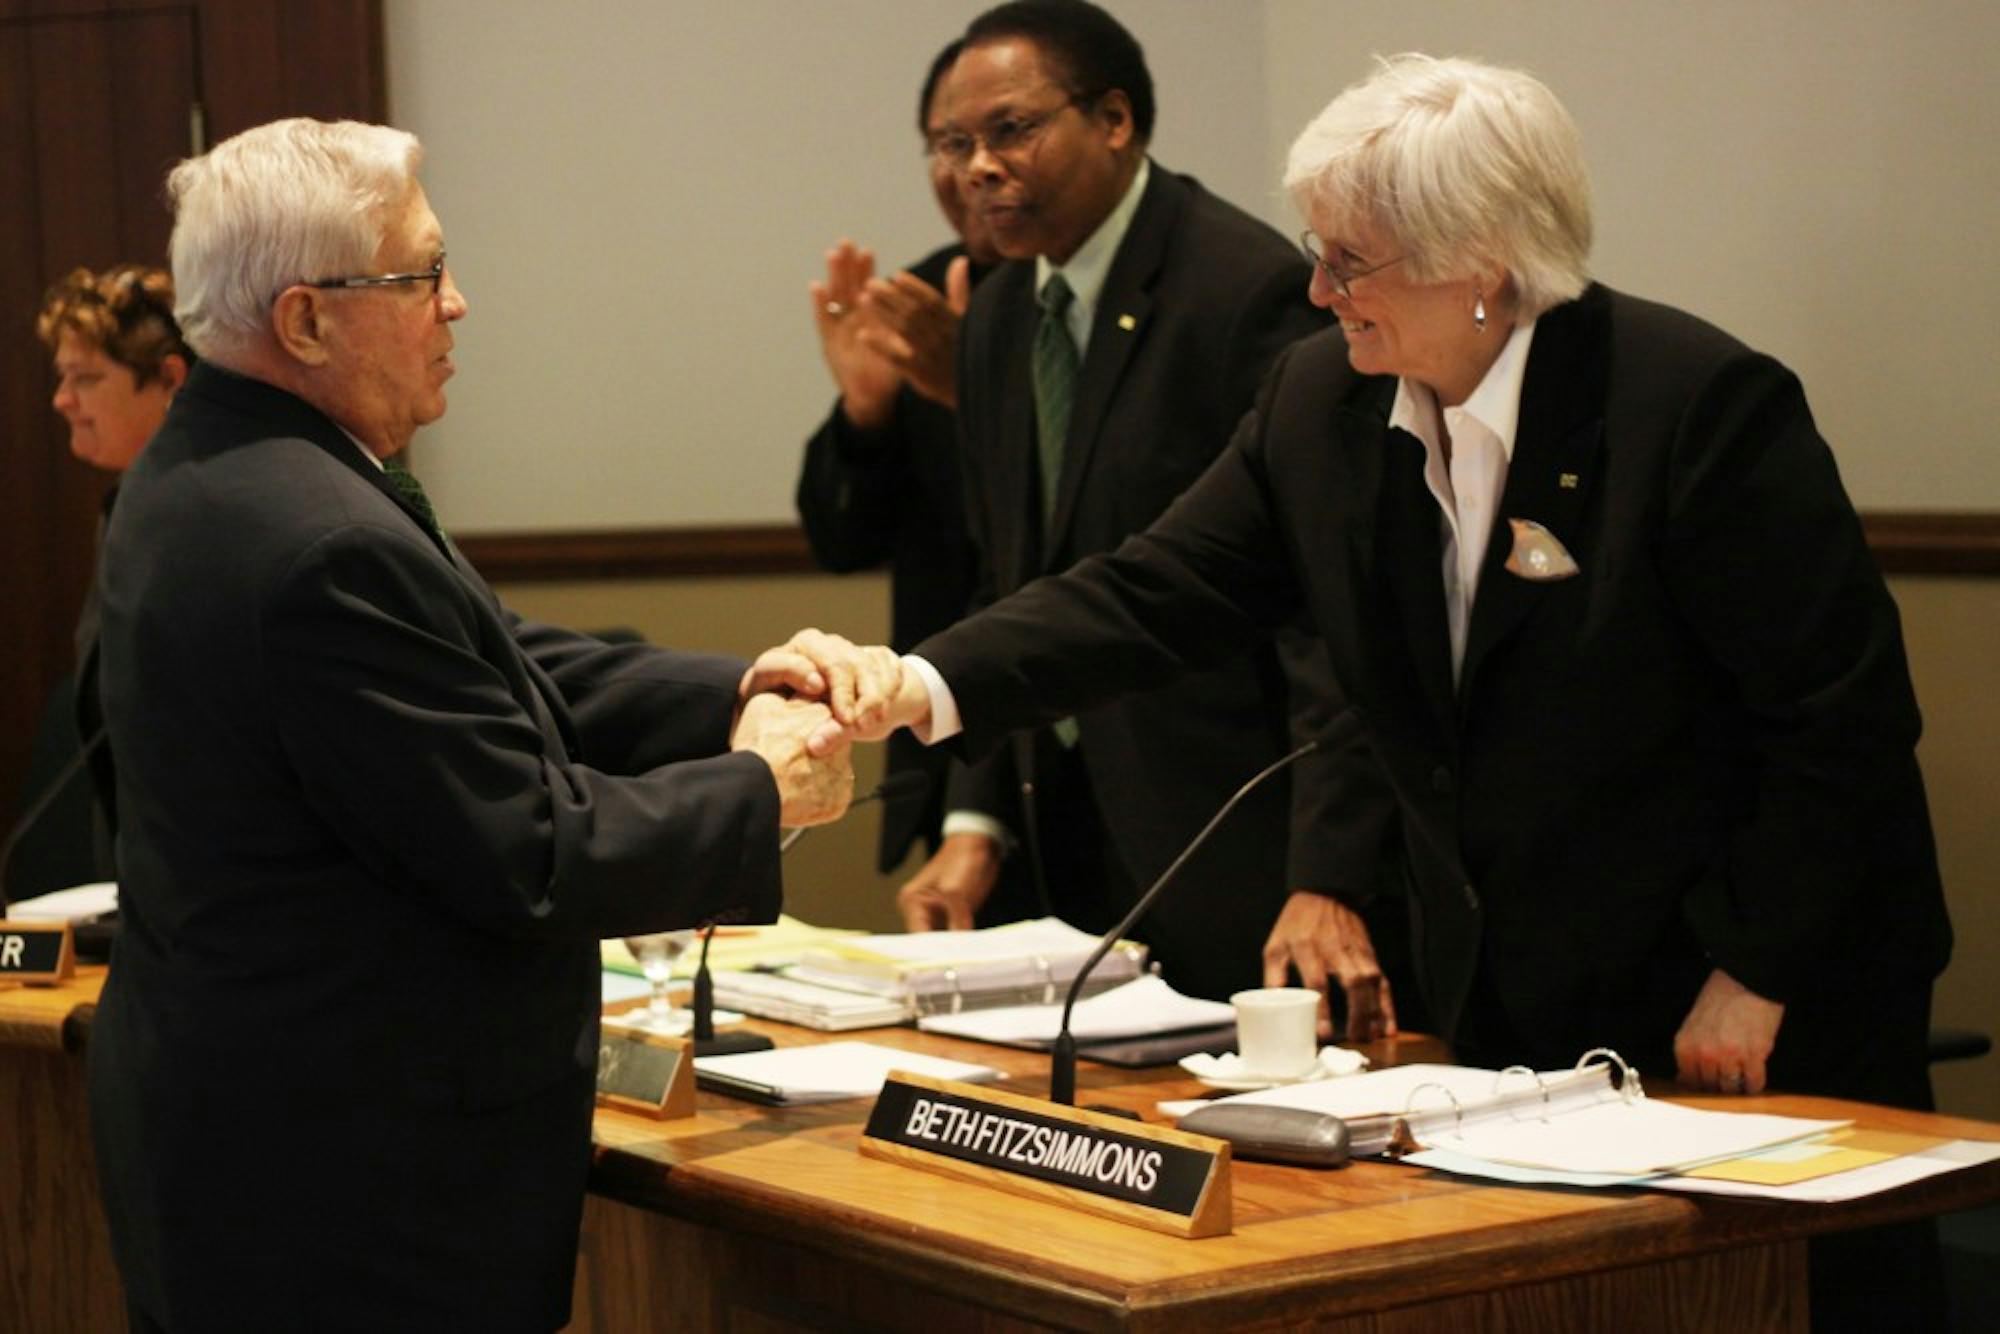 Former EMU Regents Gary Hawks, who was presented Emeritus Regent status Tuesday, shakes hands with new Regent Beth Fitzsimmons, who was recently appointed to the board by Rick Snyder to replace Mohamed Okdie.